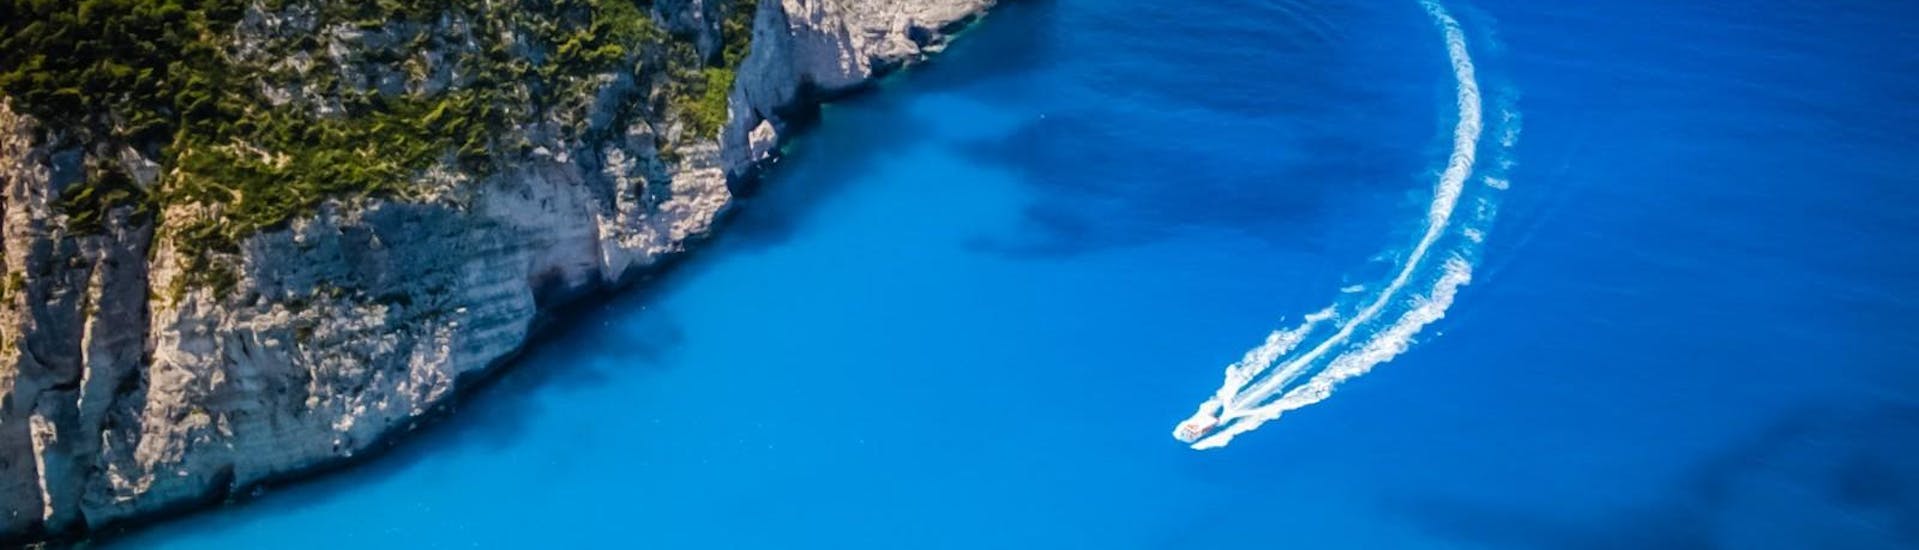 Picture of the beautiful Zakynthos Island that you can explore with Abba Tours Zante.